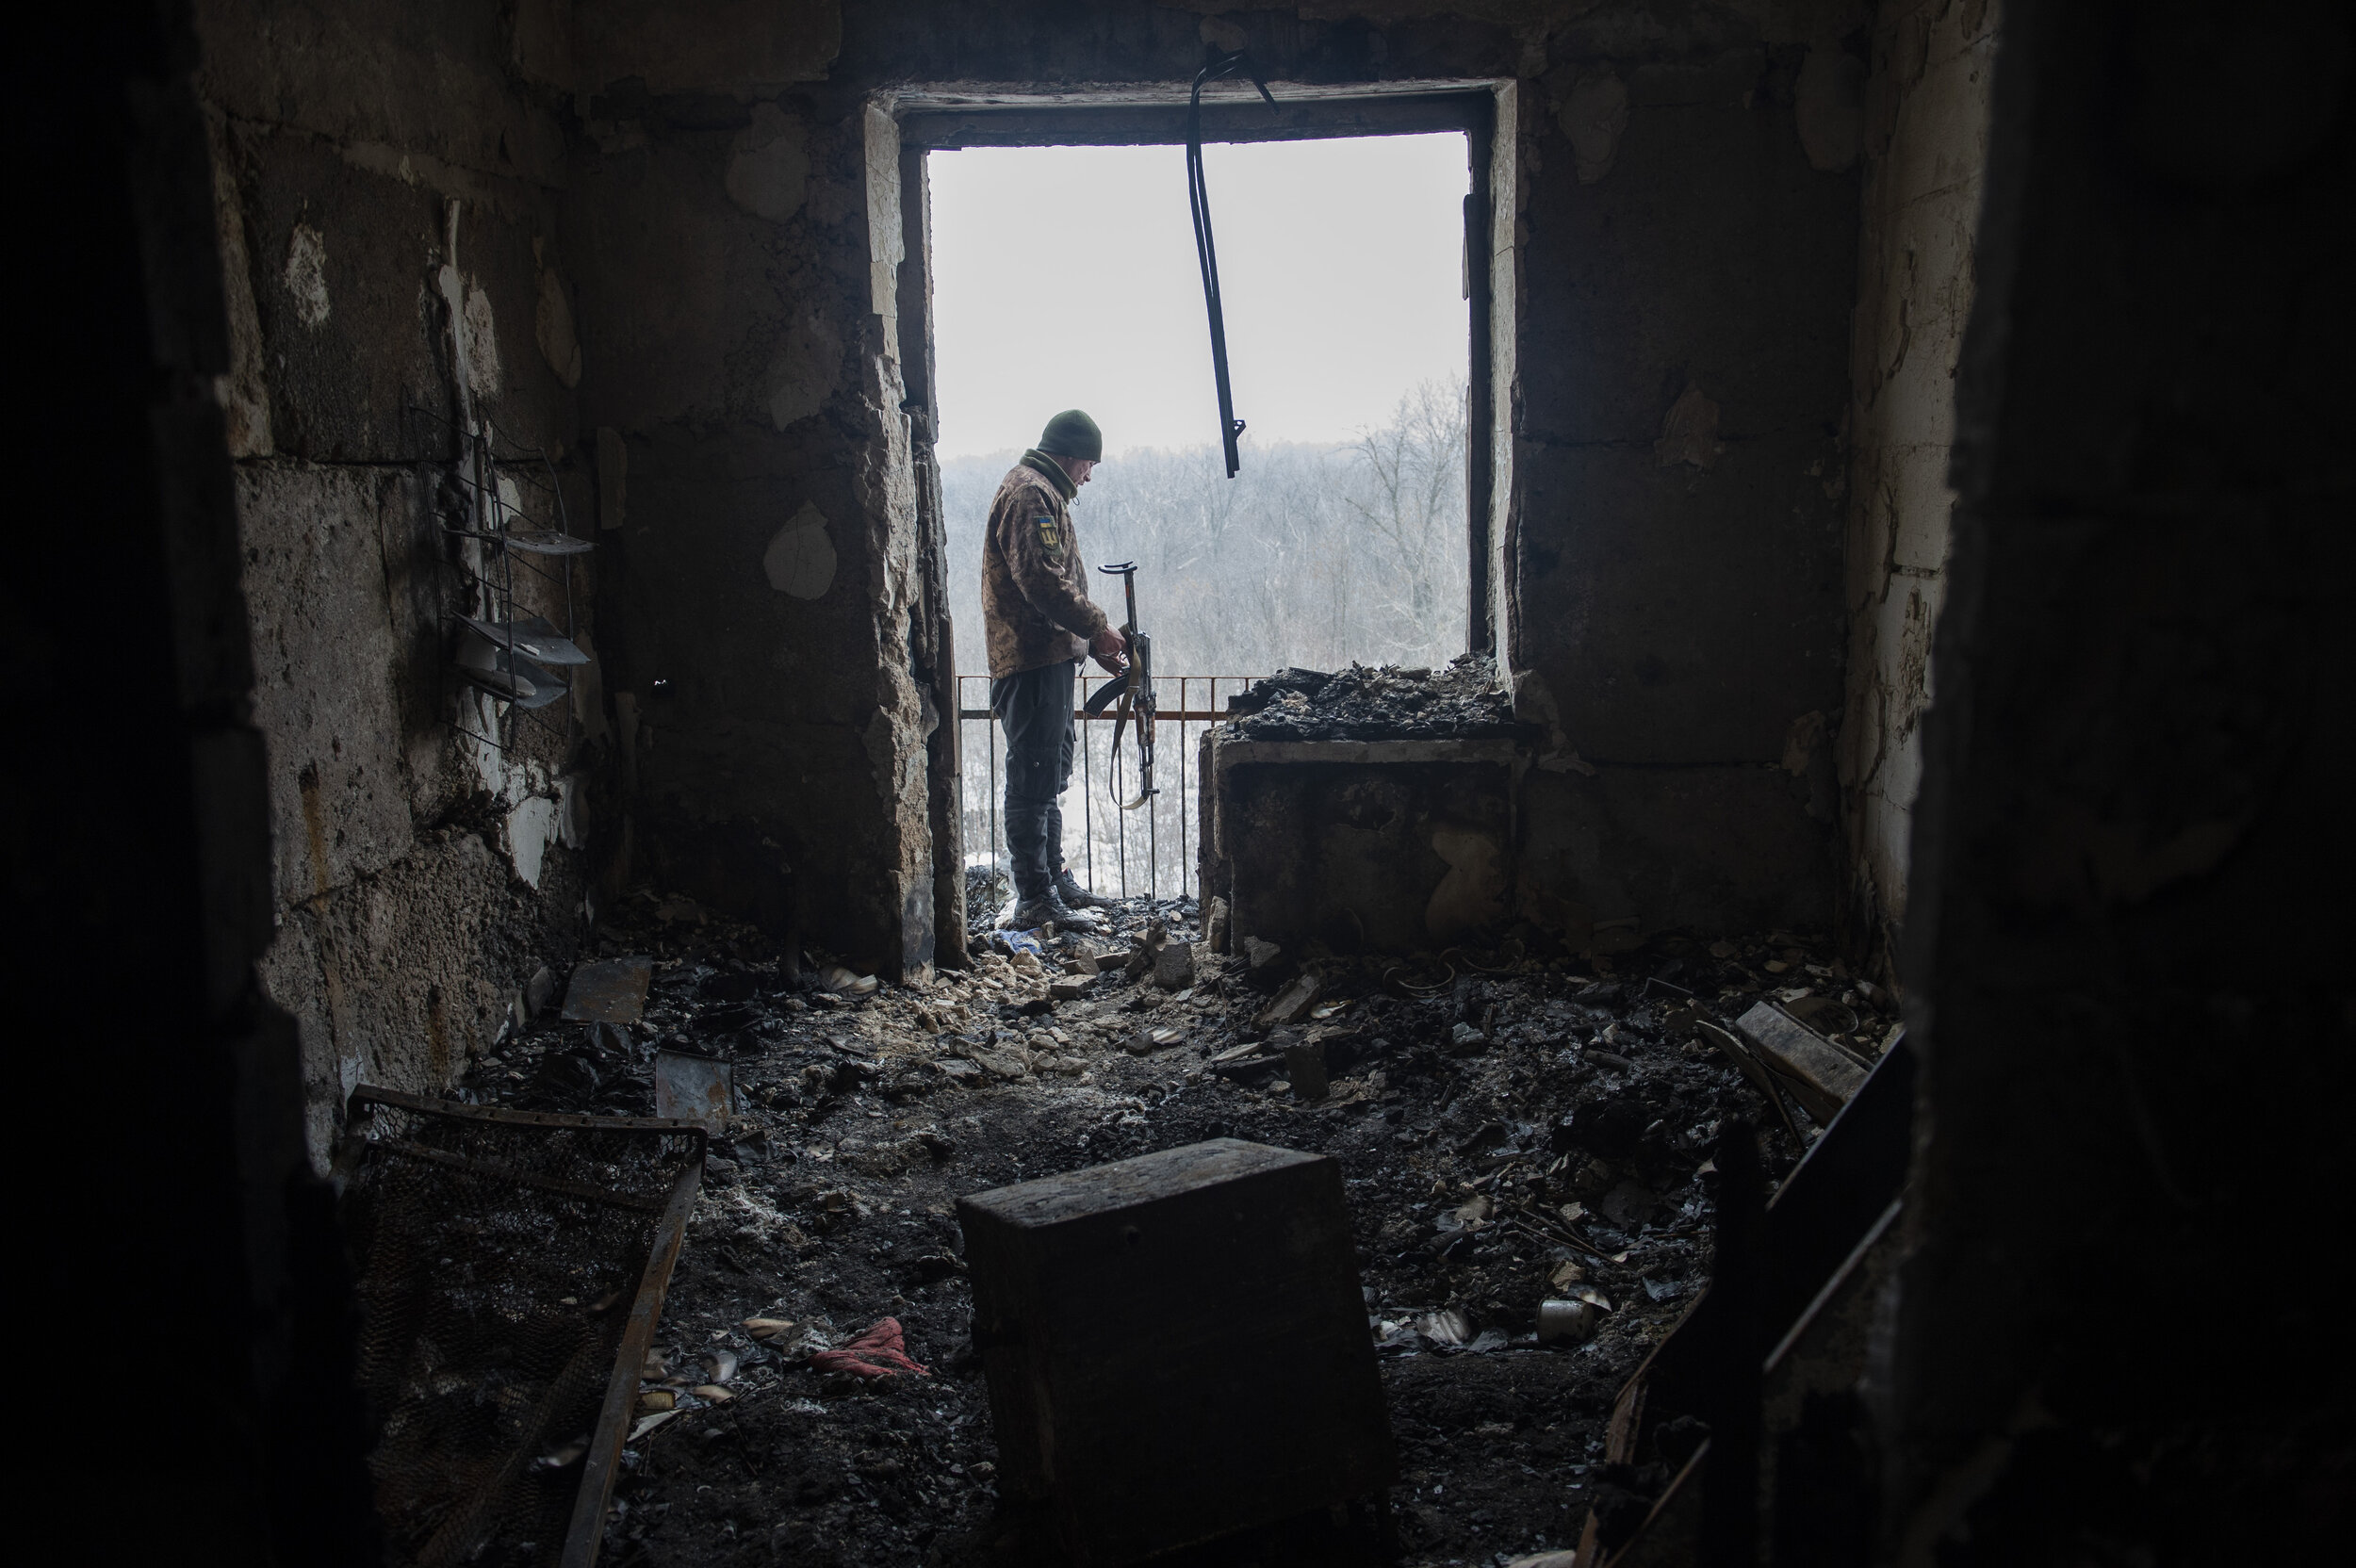  A Ukrainian soldier inspects the damage to a building in Zolote-4 that was hit by a rocket during a night of intense fighting on February 25, 2019. Firefights are a common occurrence near ‘Point Zero’ in Zolote where Ukrainian military and Russian b